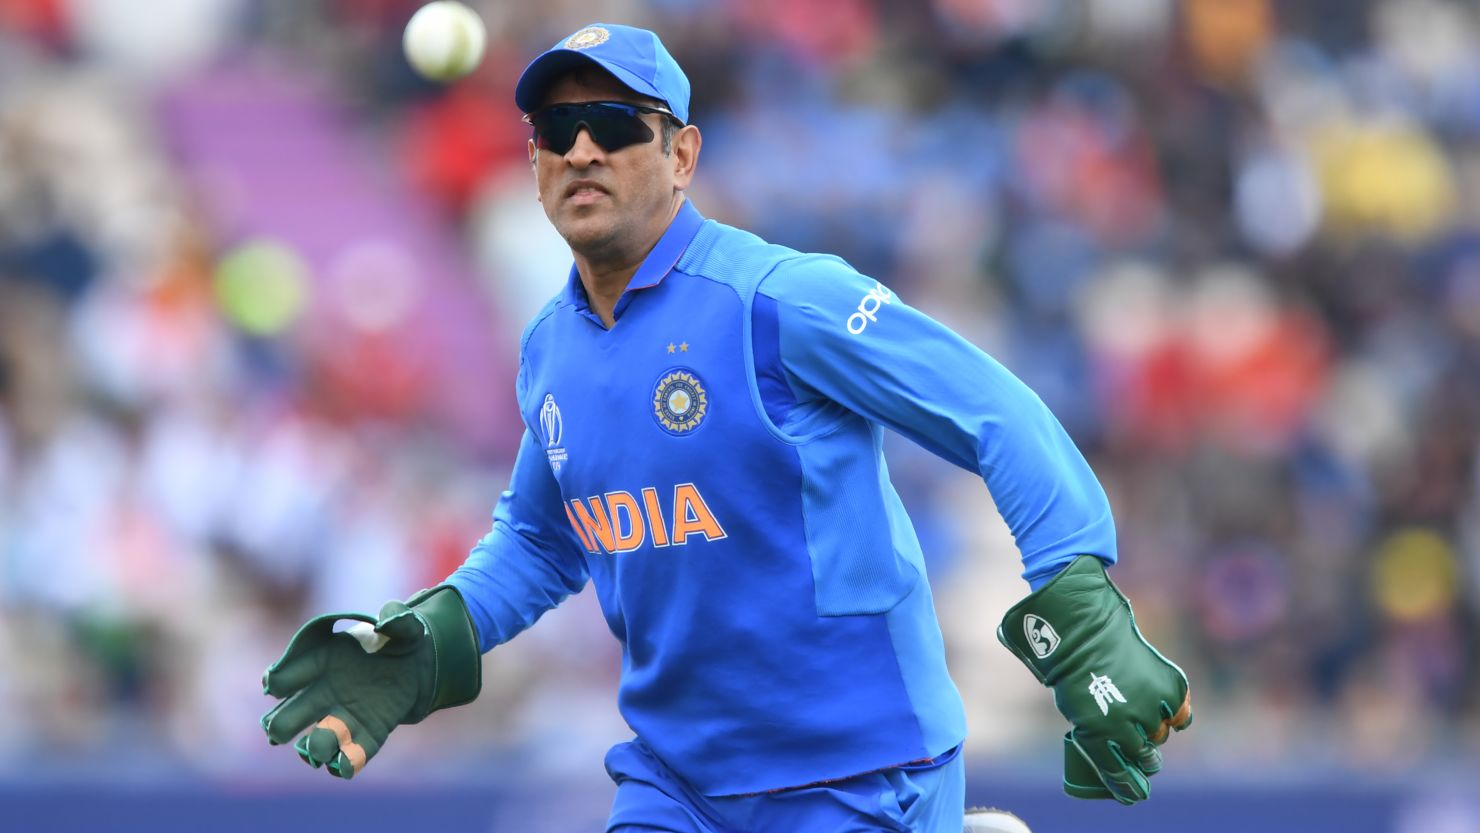 MS Dhoni wearing his wicketkeeping gloves with the army insignia.